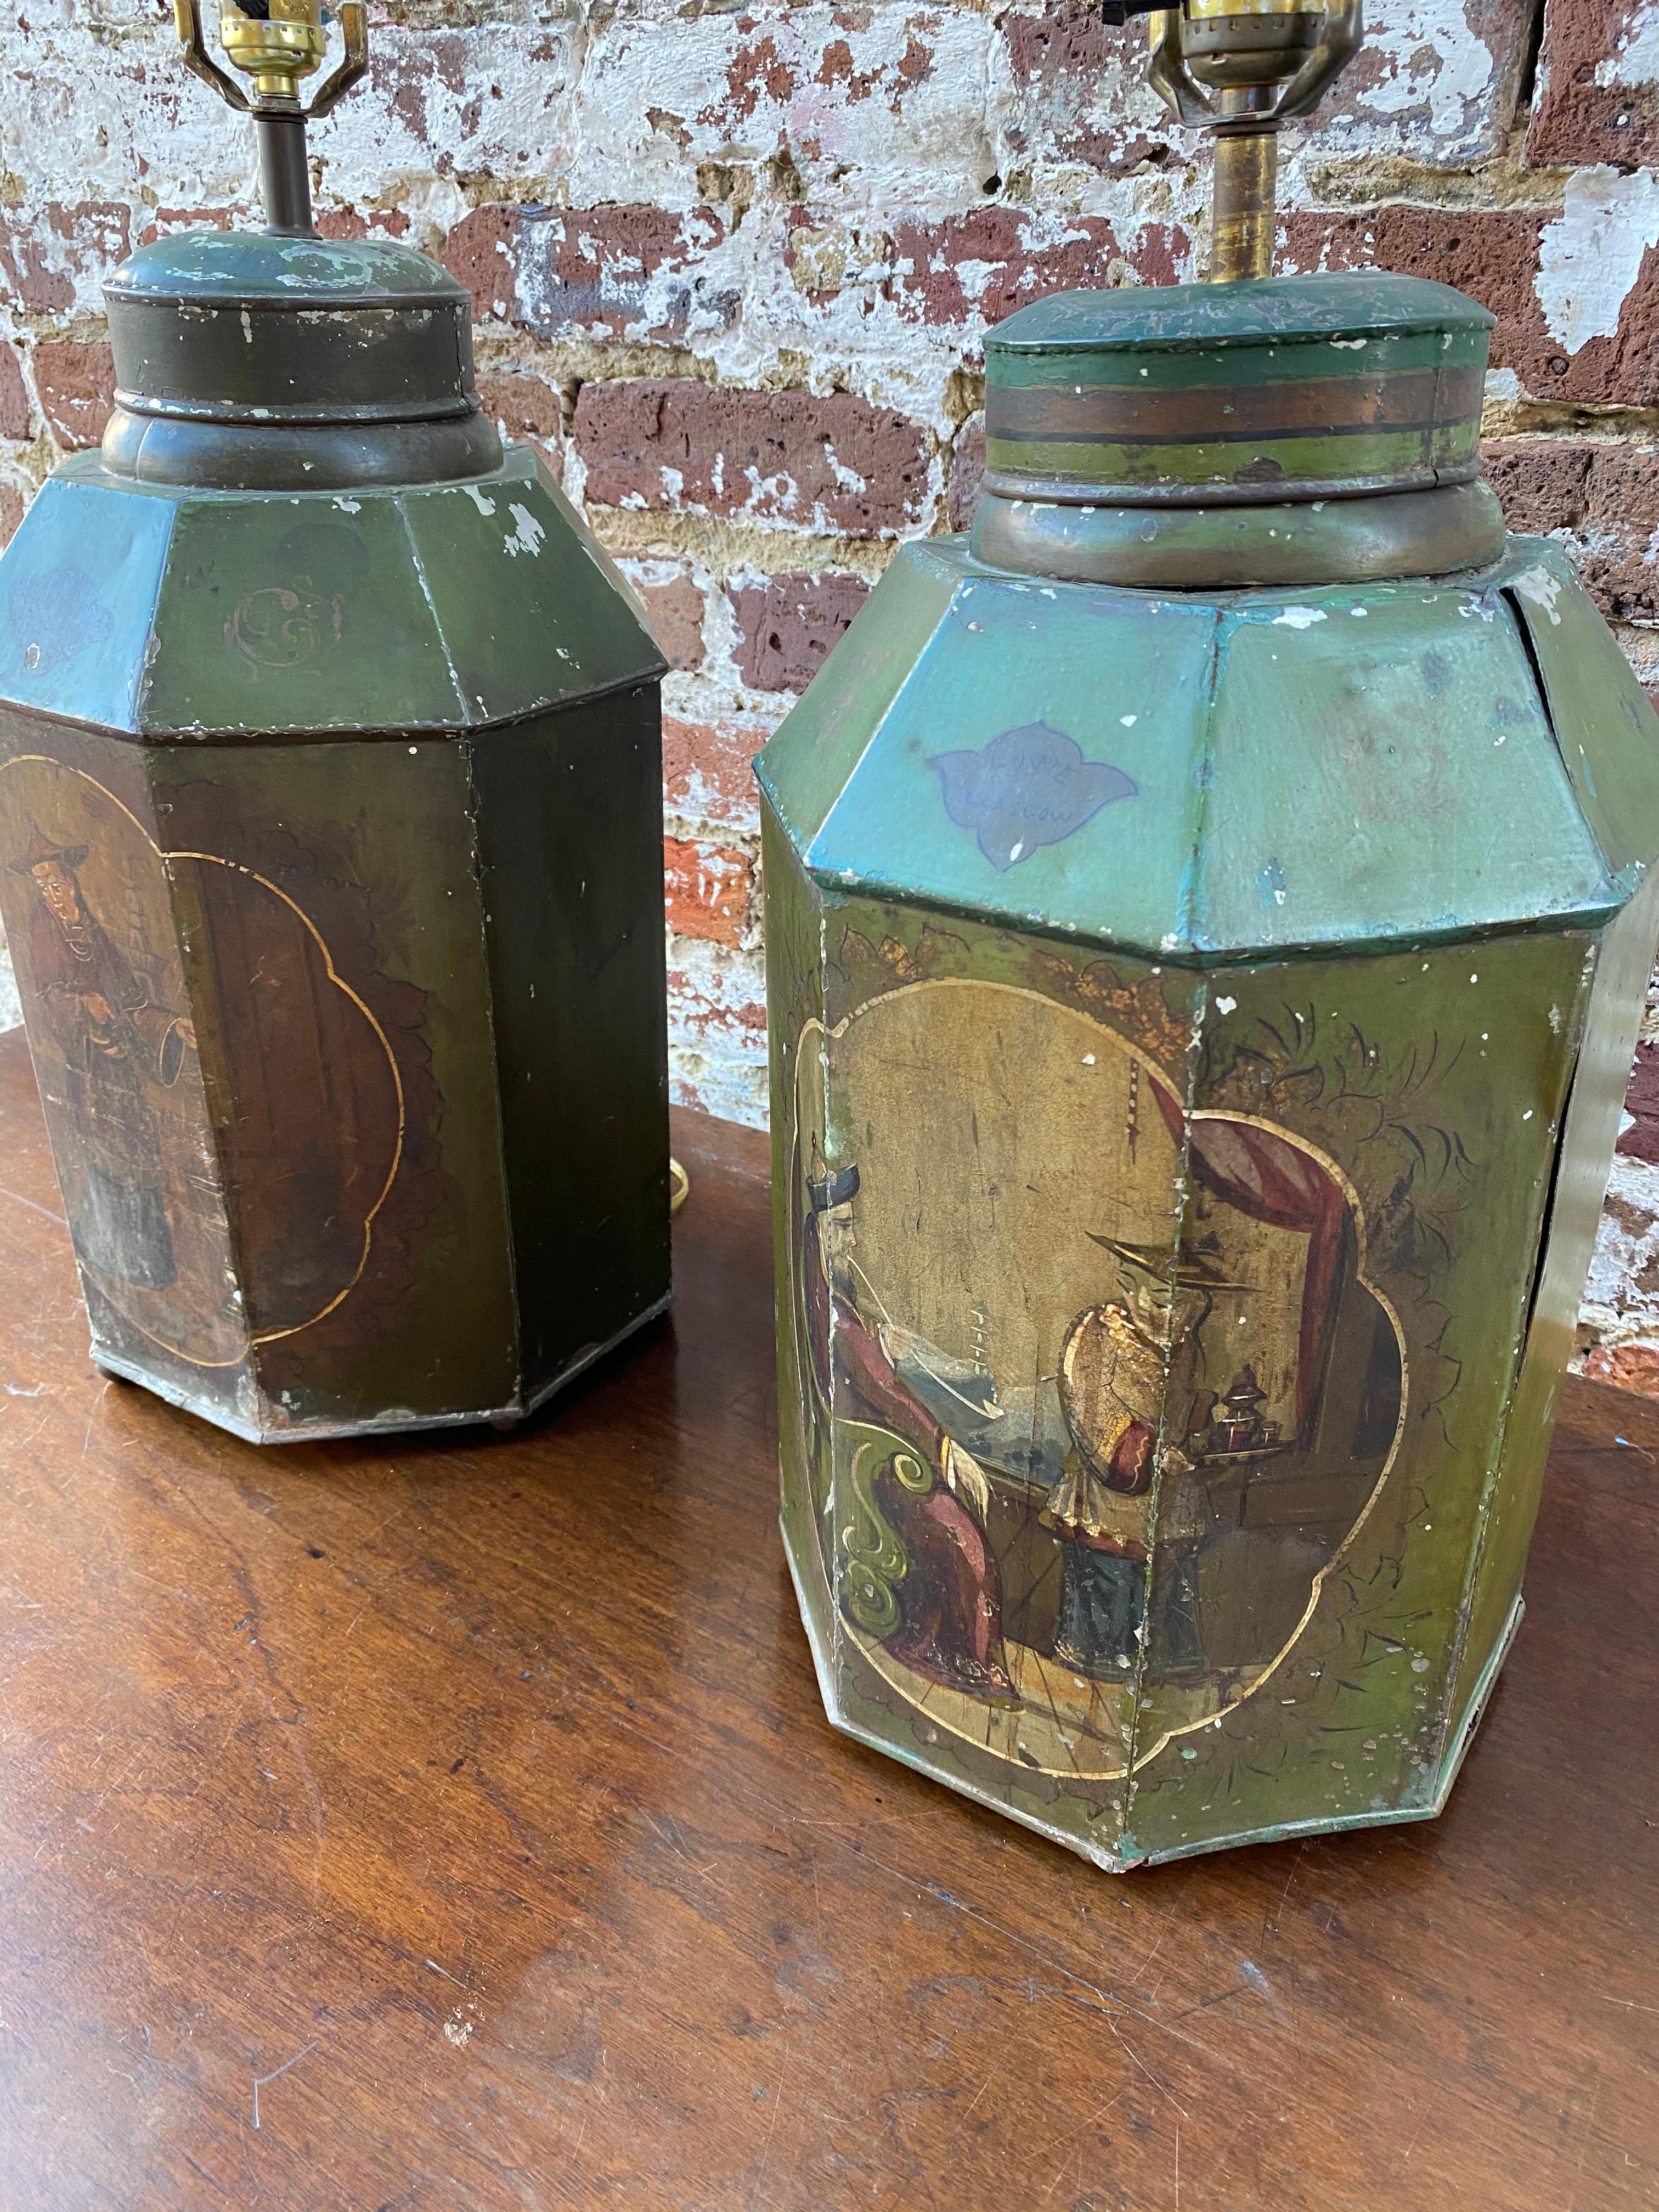 European Early 19th Century Tea Bins in Original Green Paint with Decorative Paint